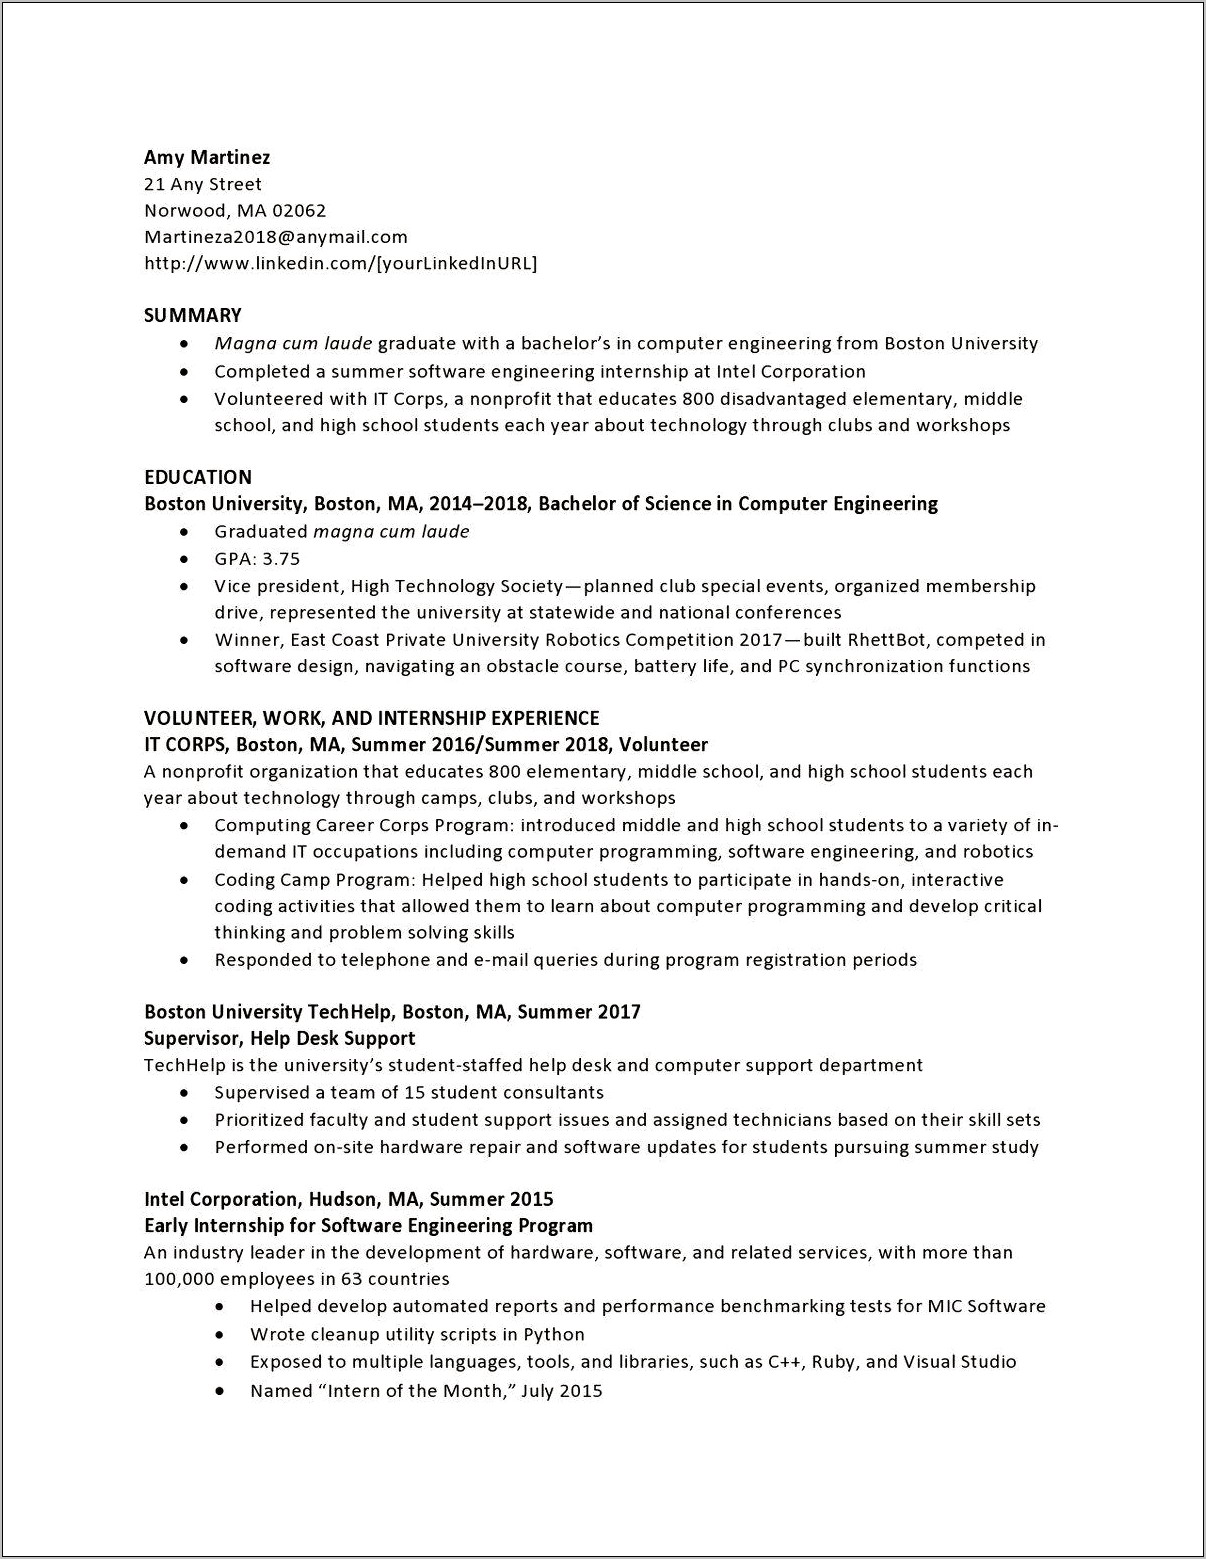 Example Of A Private Pilot Resume